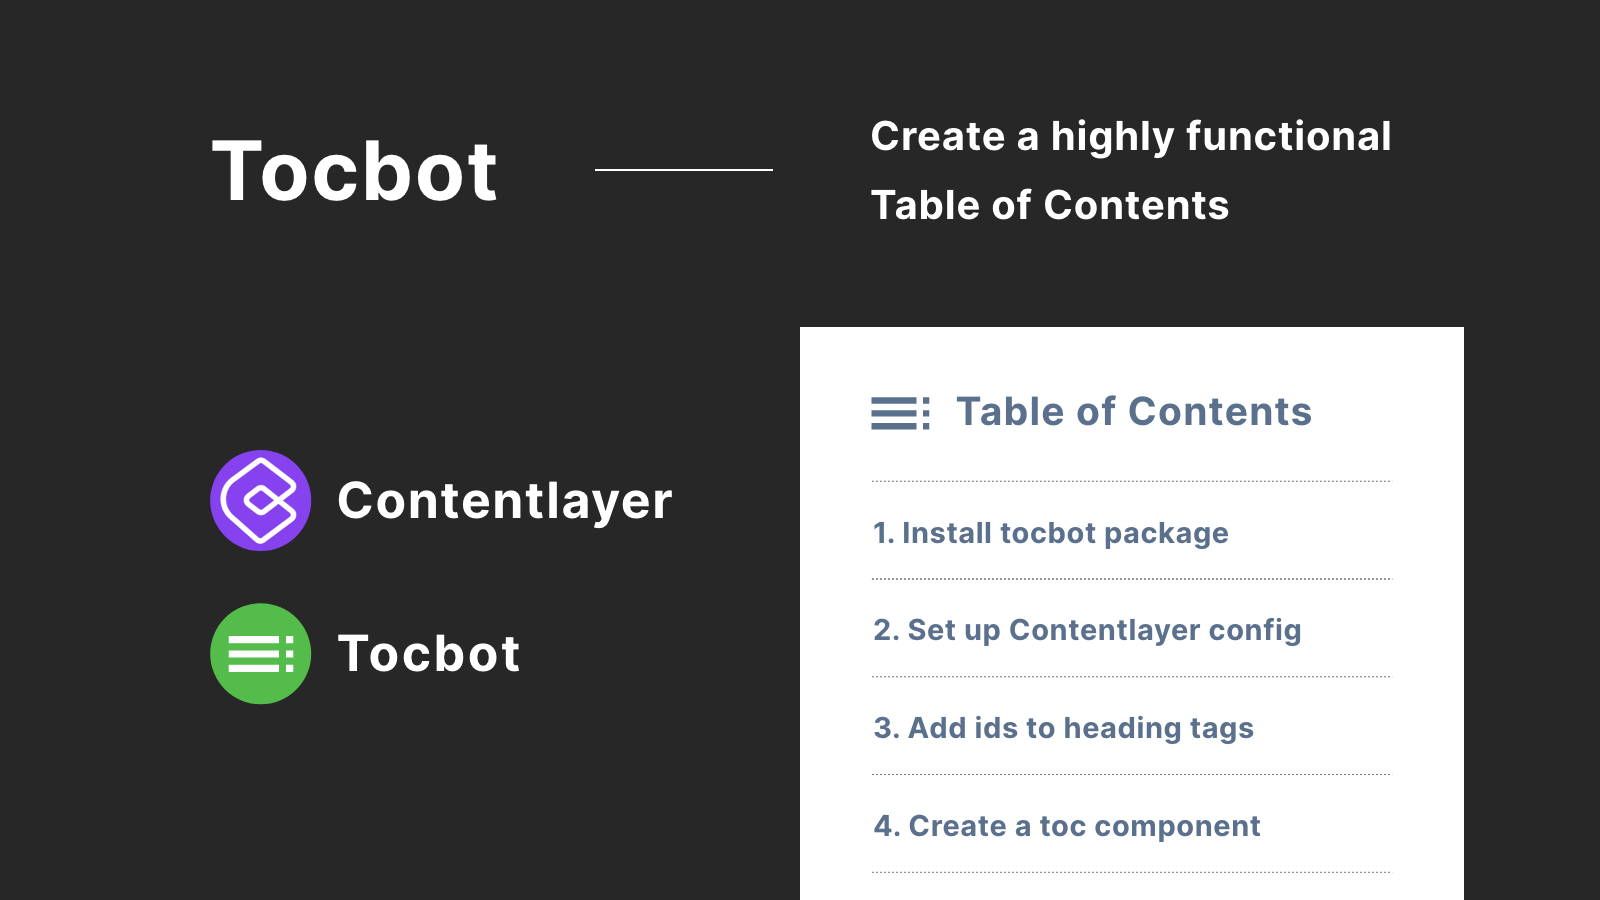 How to make a Table of Contents using Tocbot with Contentlayer